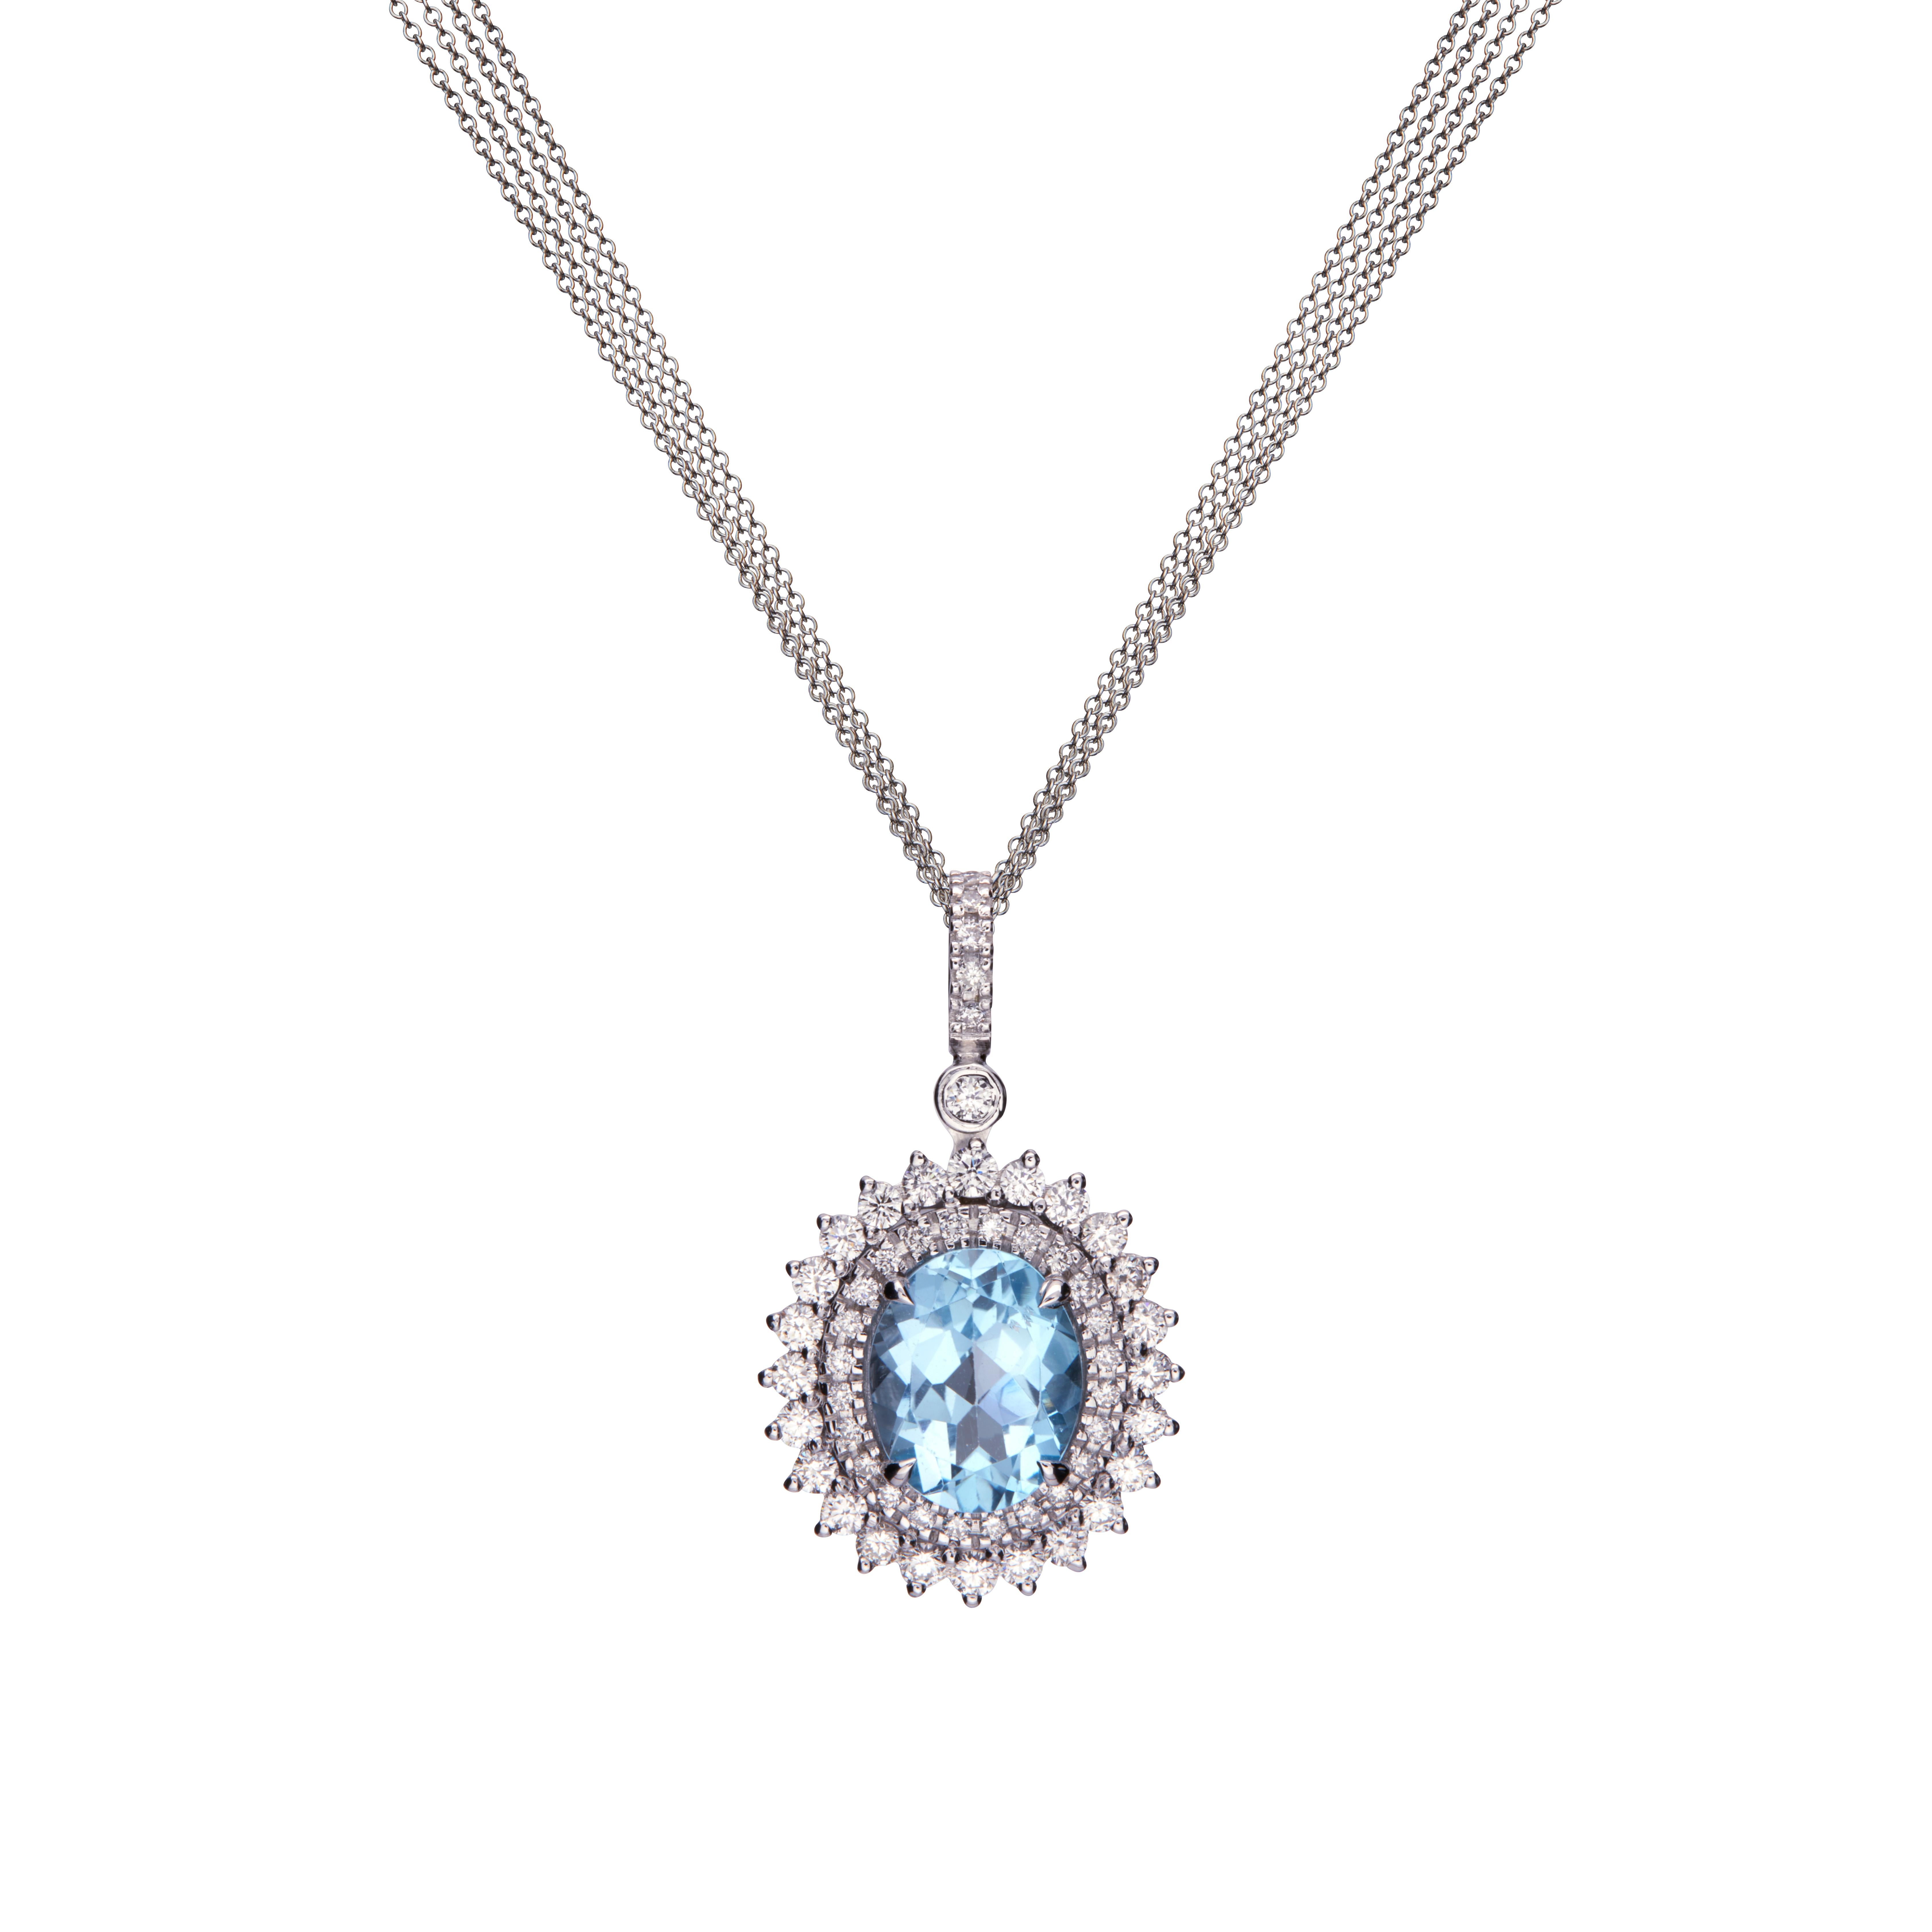 Blue Topaz 3.19ct Pendant Necklace made of 18Kt White Gold and double halo with 0.73 carat Brilliant Cut Diamonds. The blue topaz is carefully set among four prongs while each round brilliant diamond—specifically chosen to be part of this